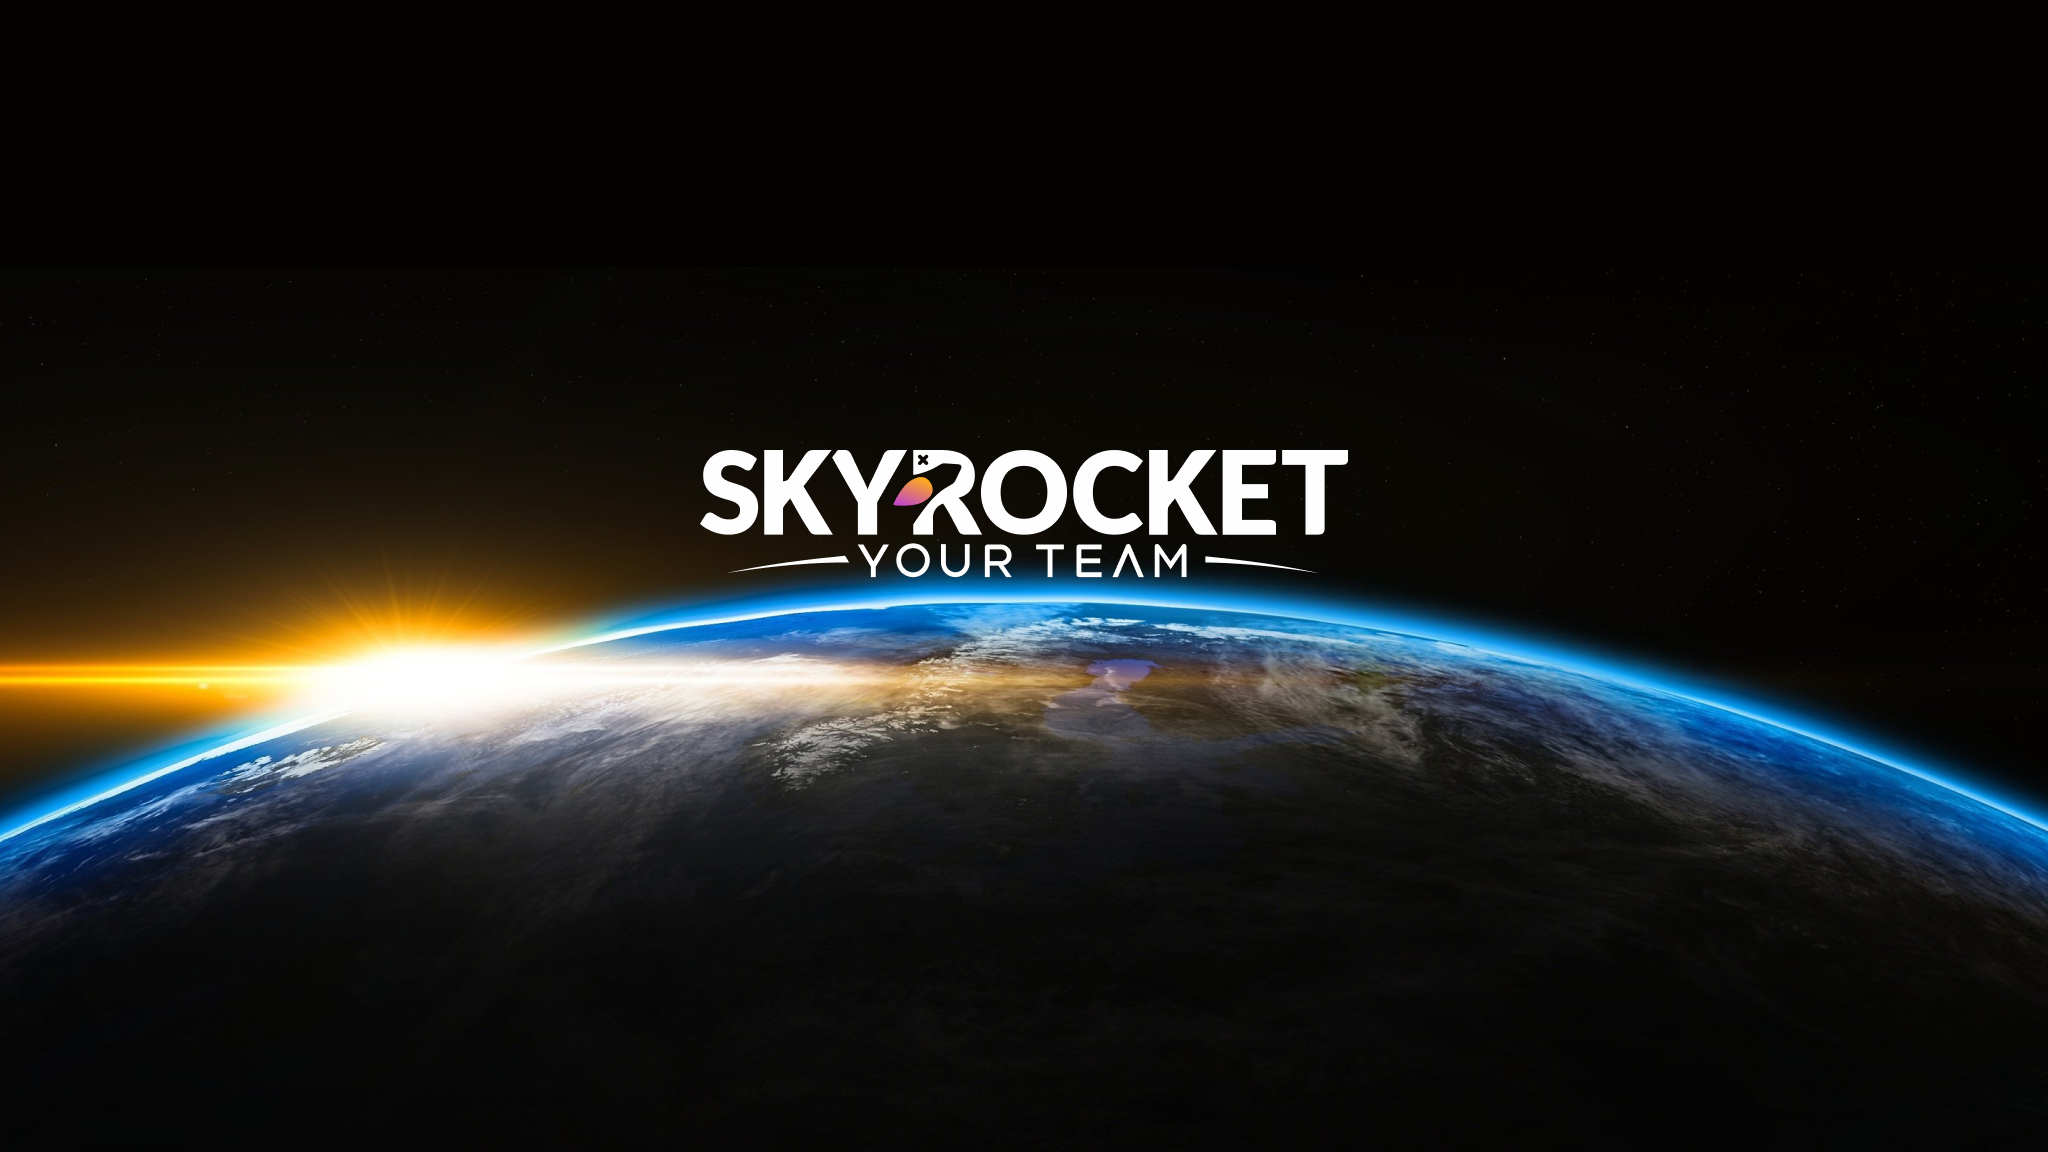 Find pricing, reviews and other details about Skyrocket Your Team